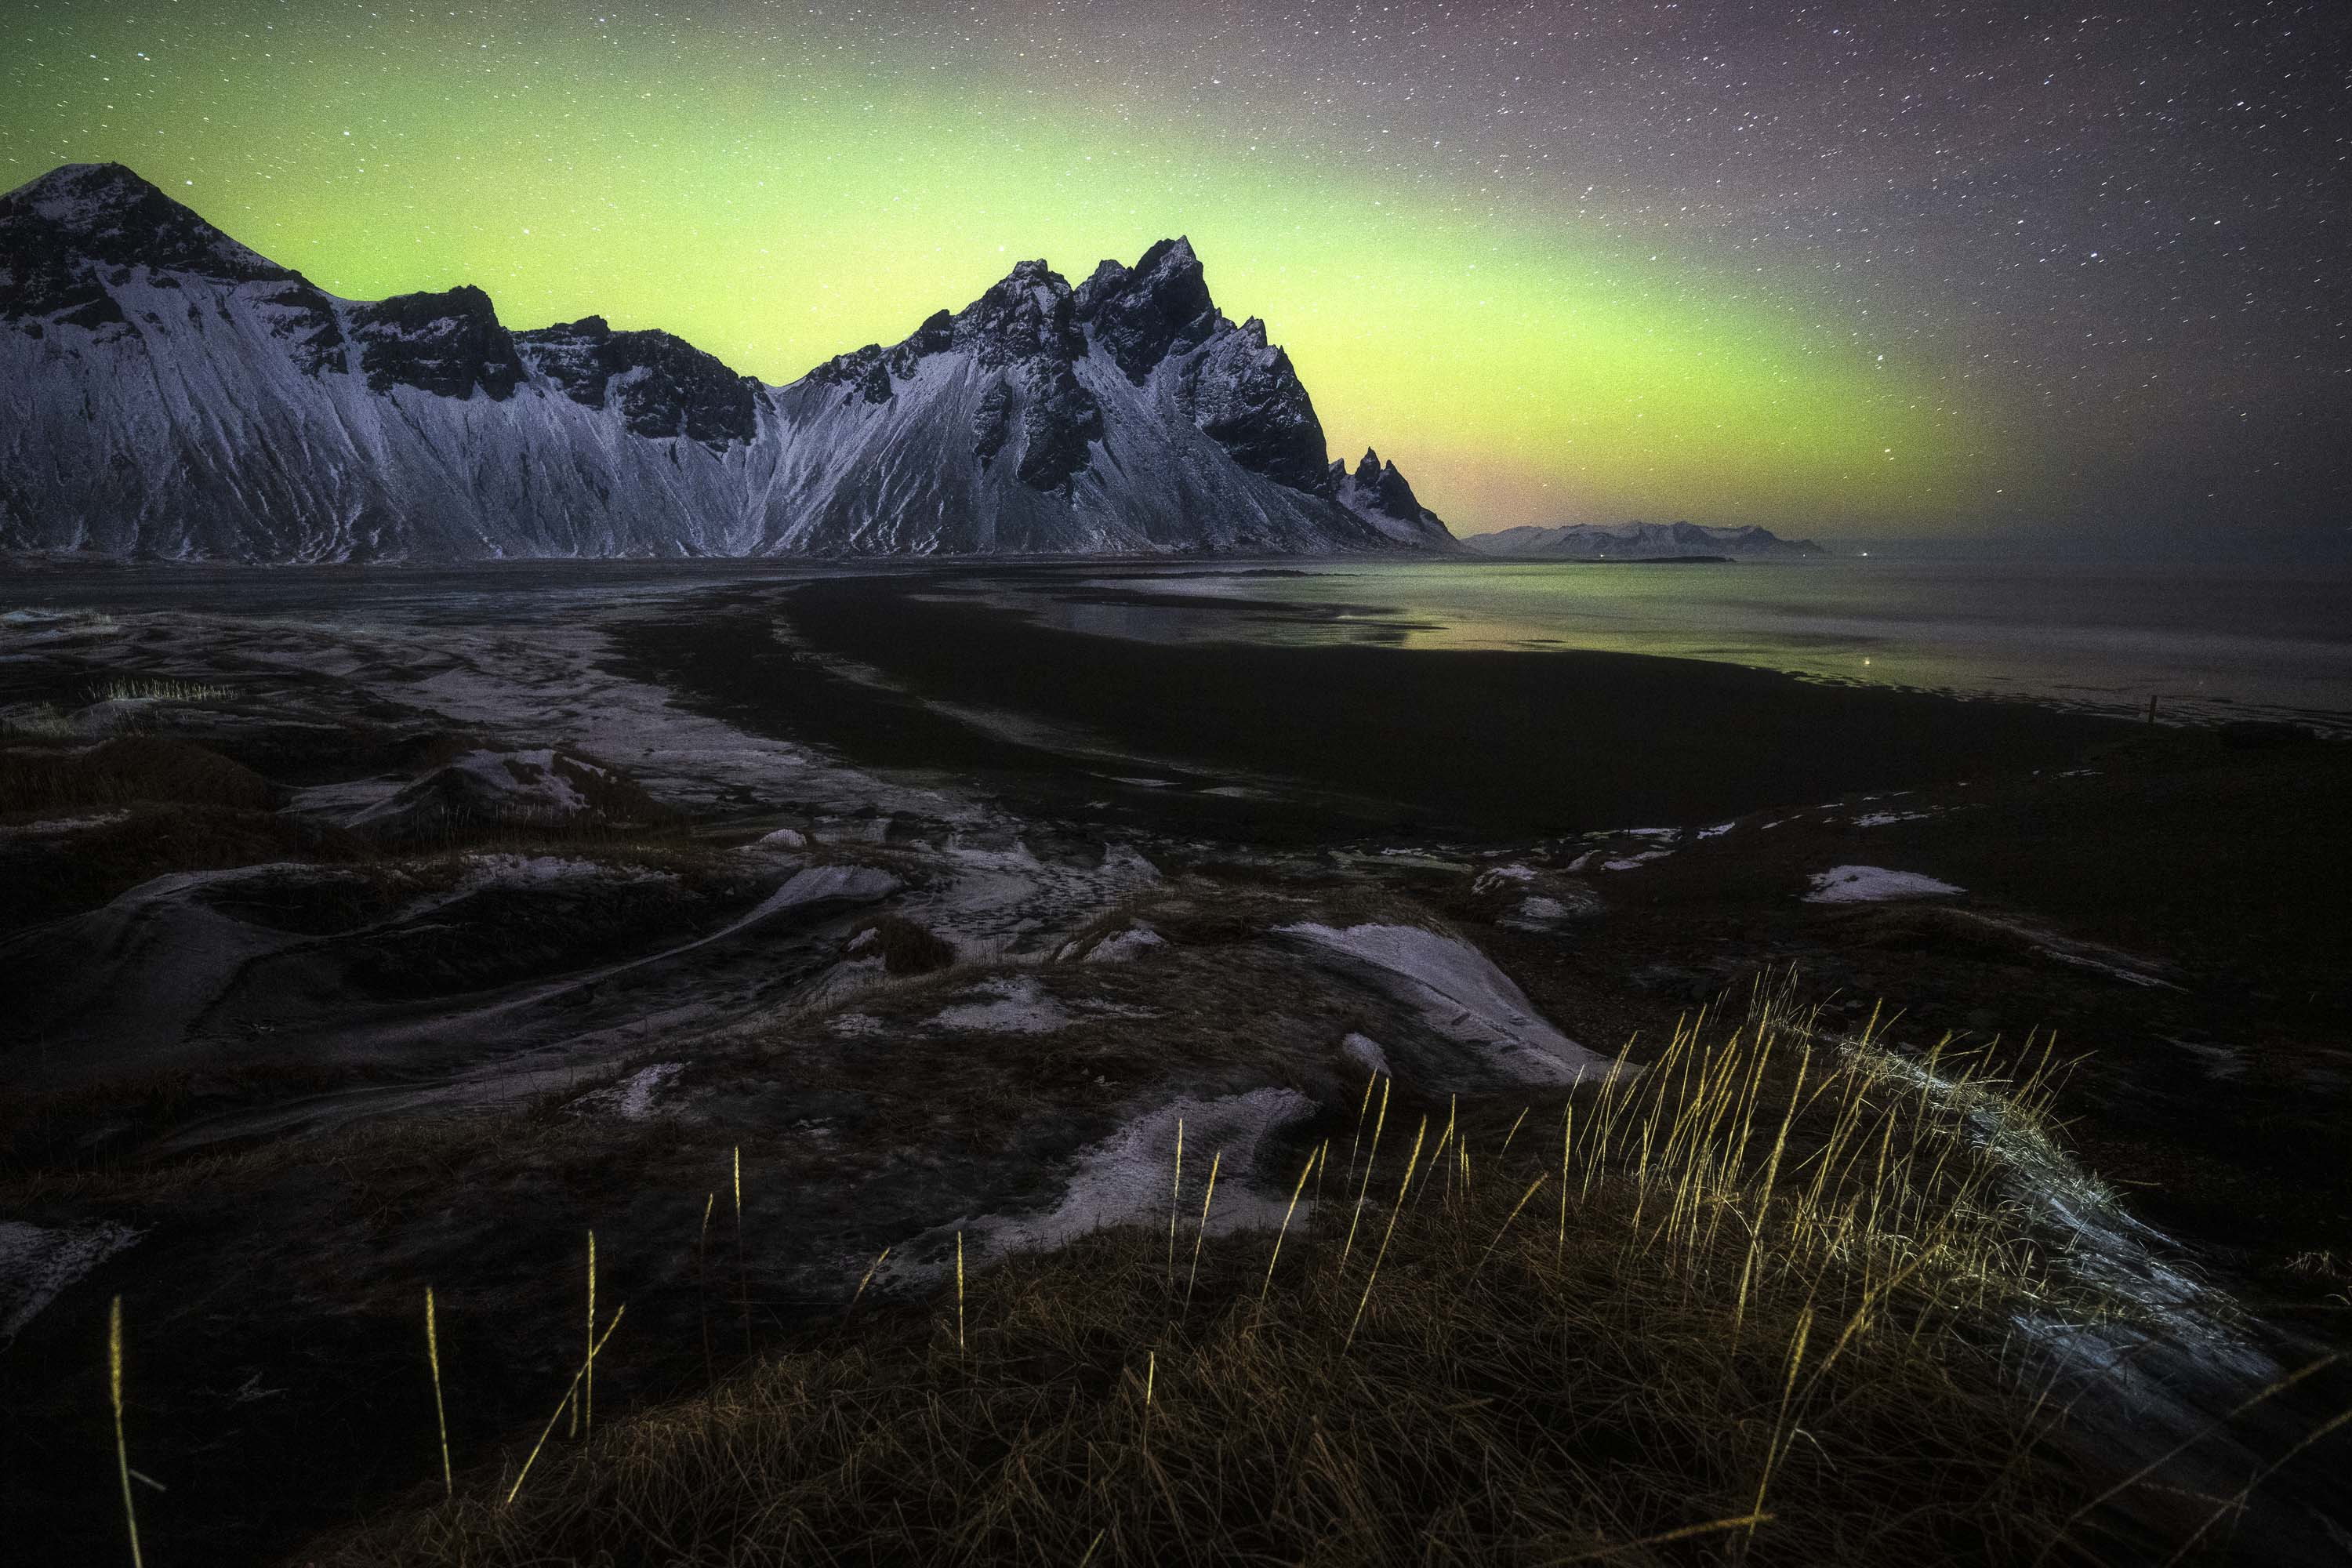 Northern Lights over snowy mountains near Stokksnes Iceland.